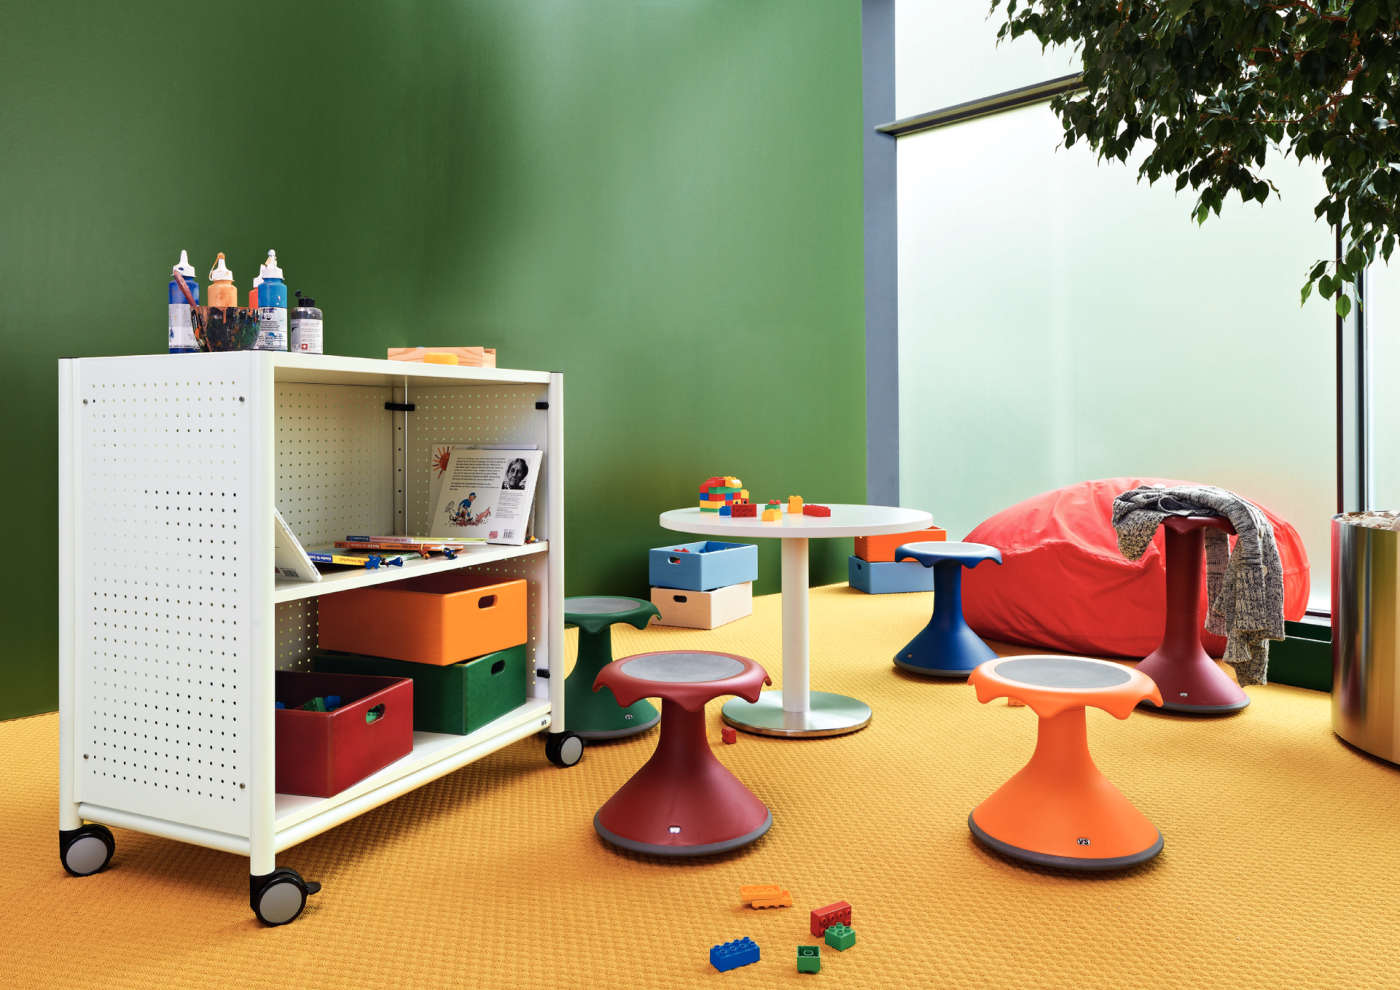 Furniture for childcare.